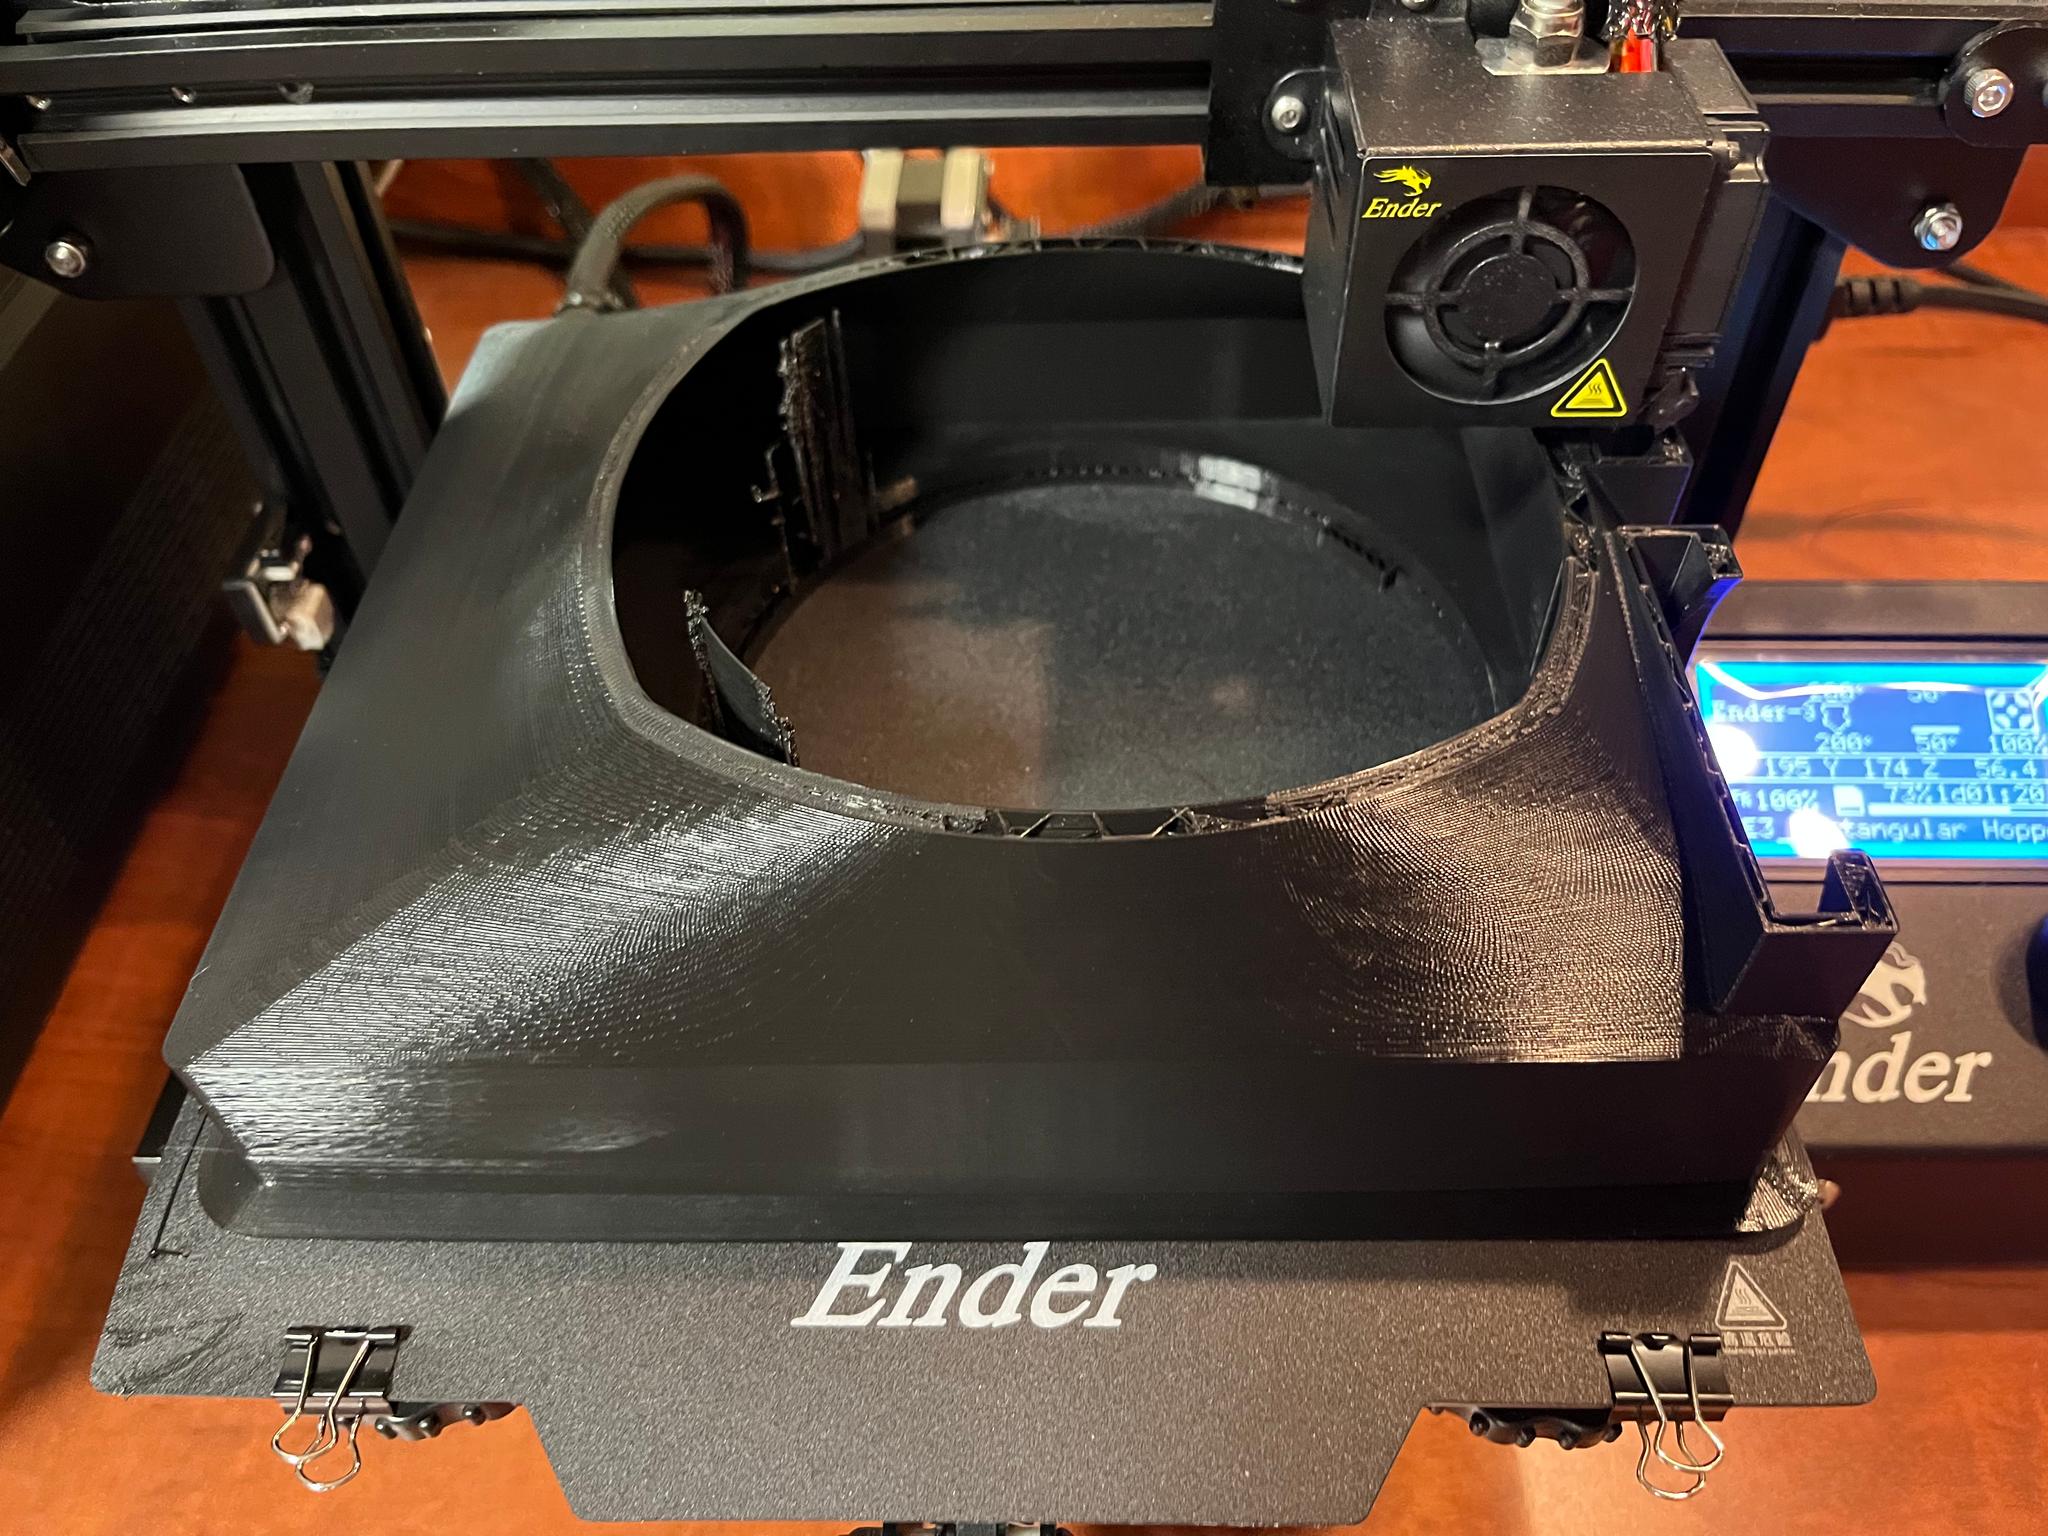 Funnel portion of print has printed successfully.